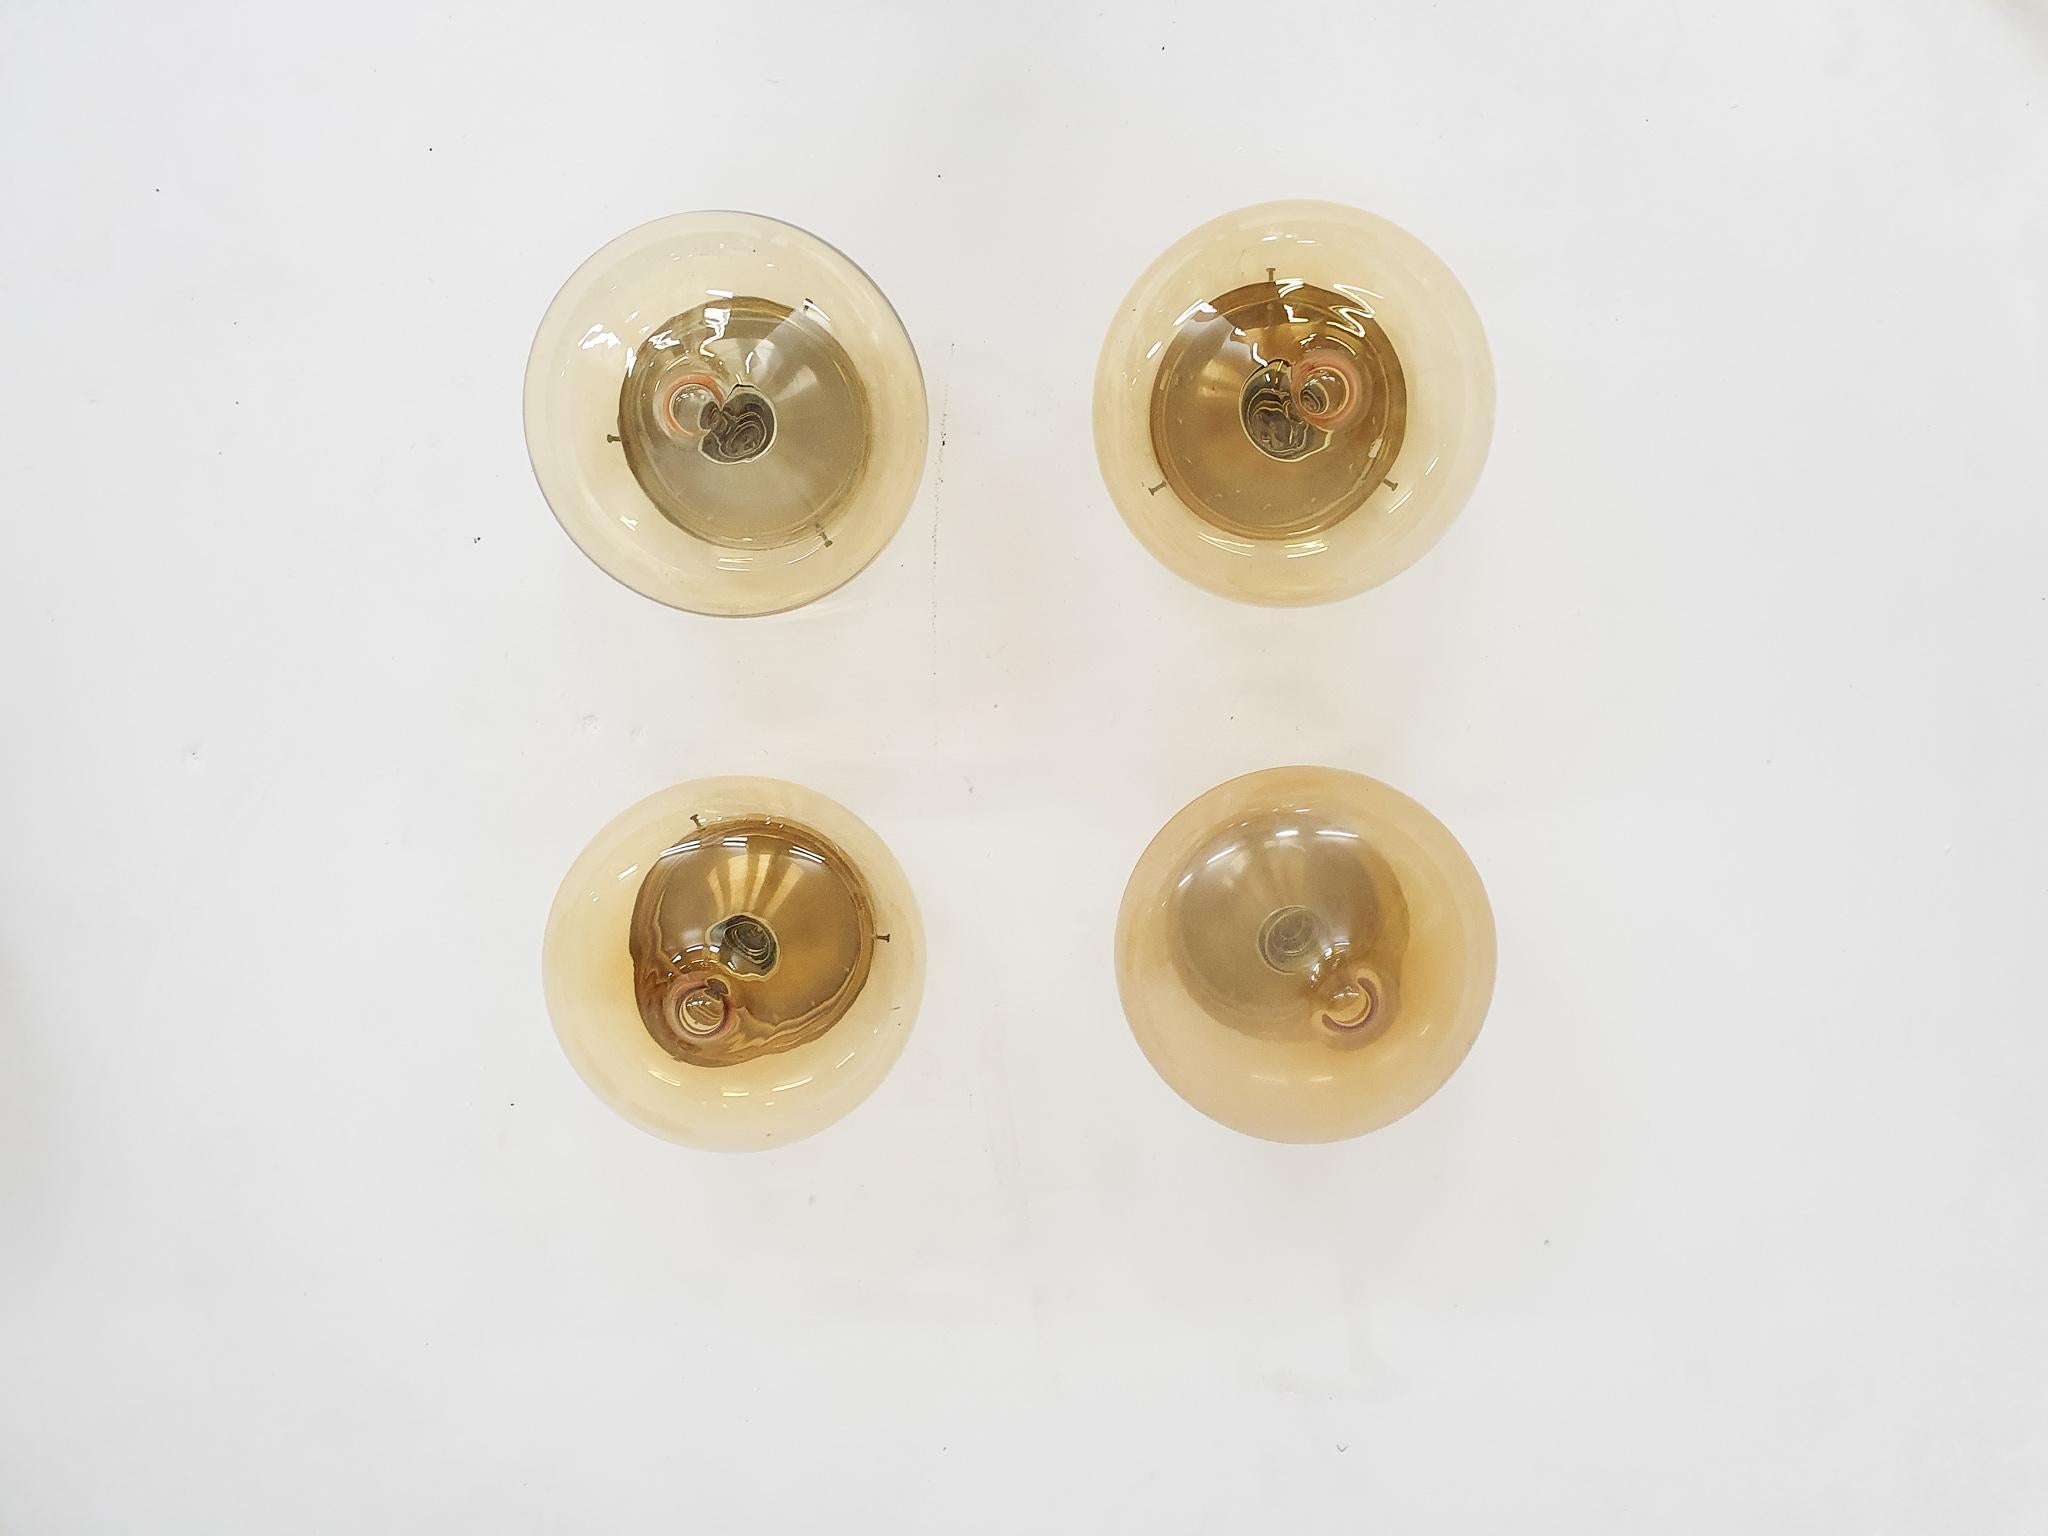 Dijkstra glass ceiling light “Drop”

4x small: diameter: 30 cm; Height: 25 cm

We also have one larger available

All our lights are checked and tested. Because of the lower voltage standard in the USA (110v vs 220v), European lighting can be safely